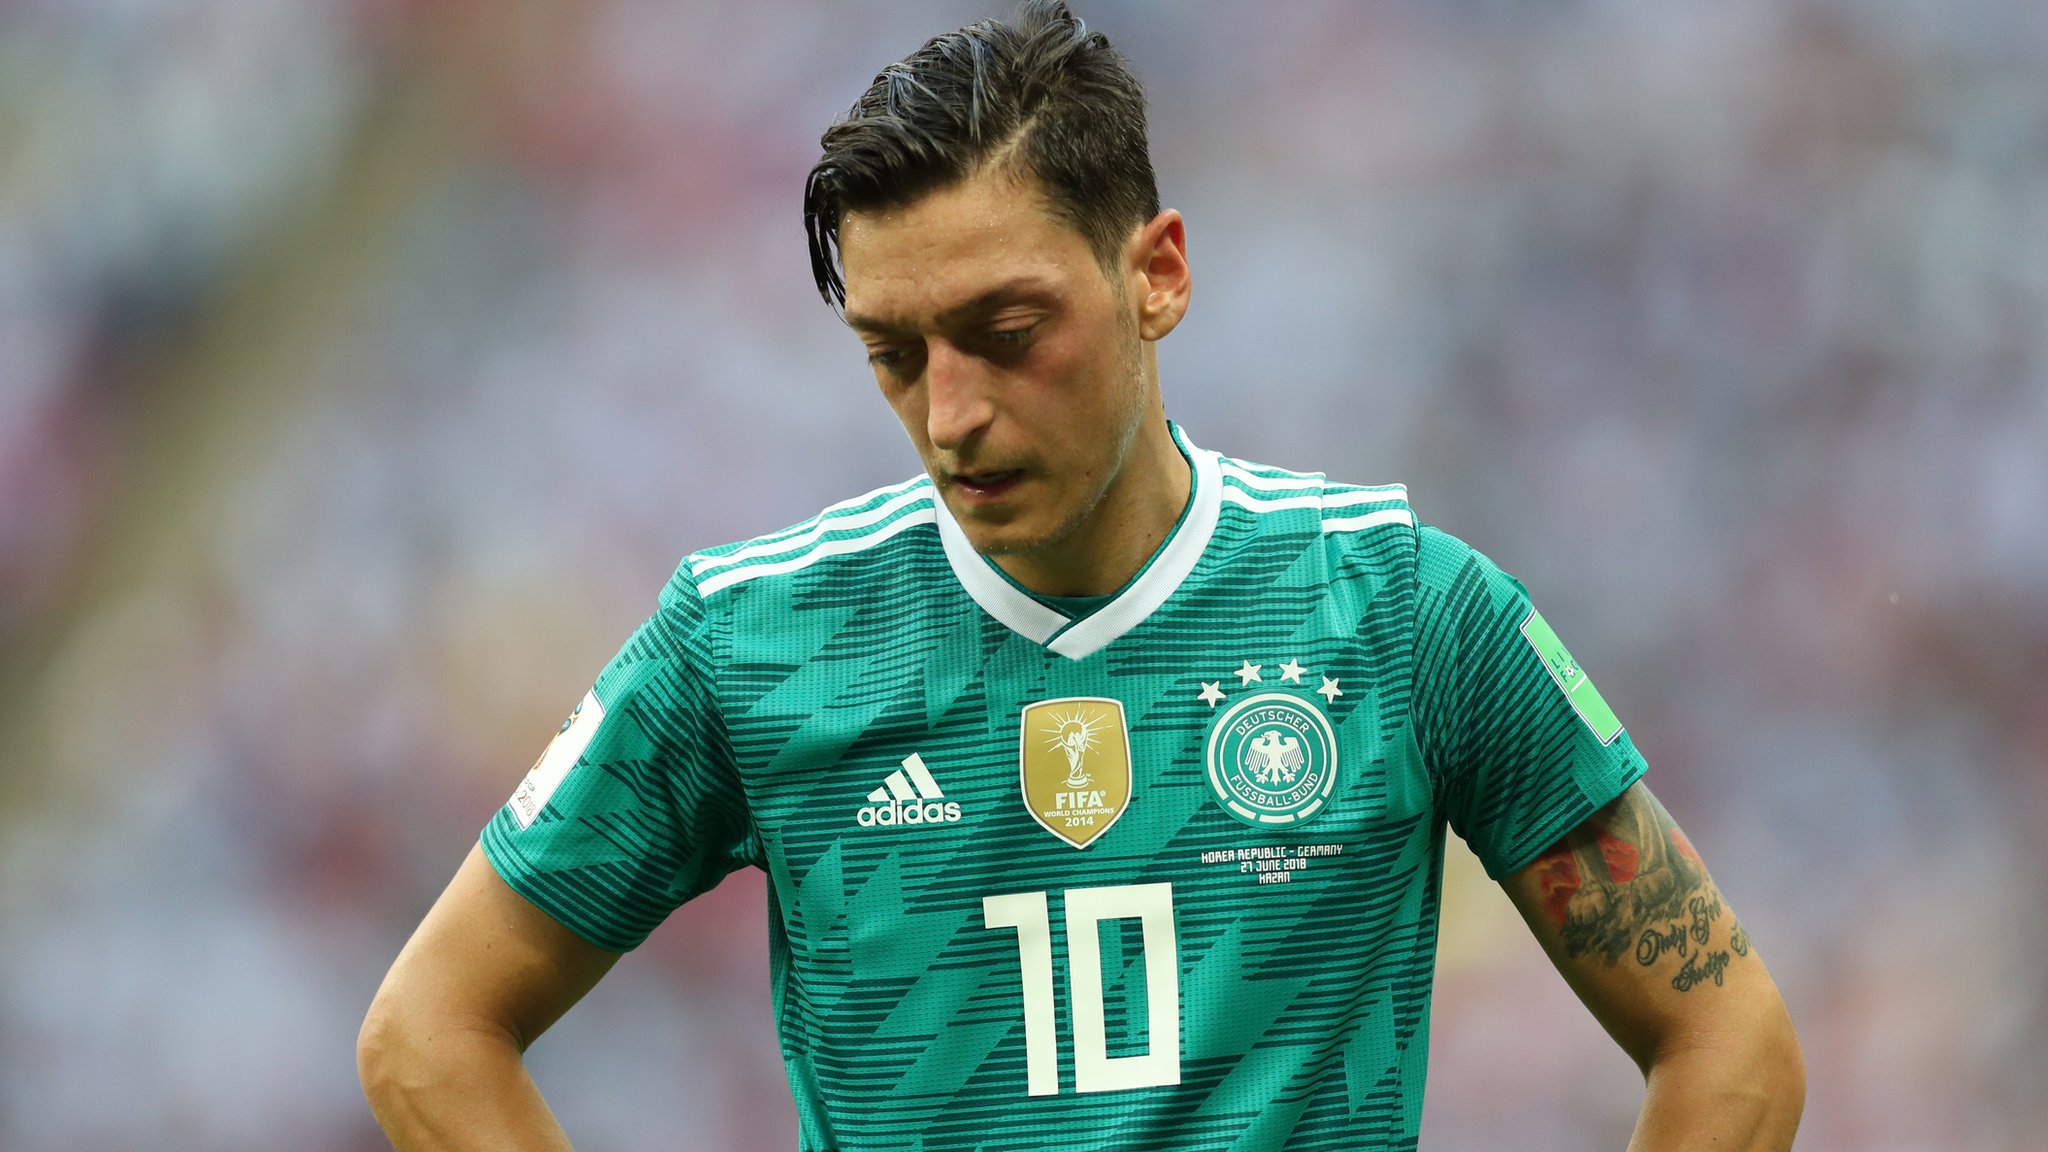 'When we win I'm German, when we lose I'm an immigrant': Ozil quits Germany over 'racism'